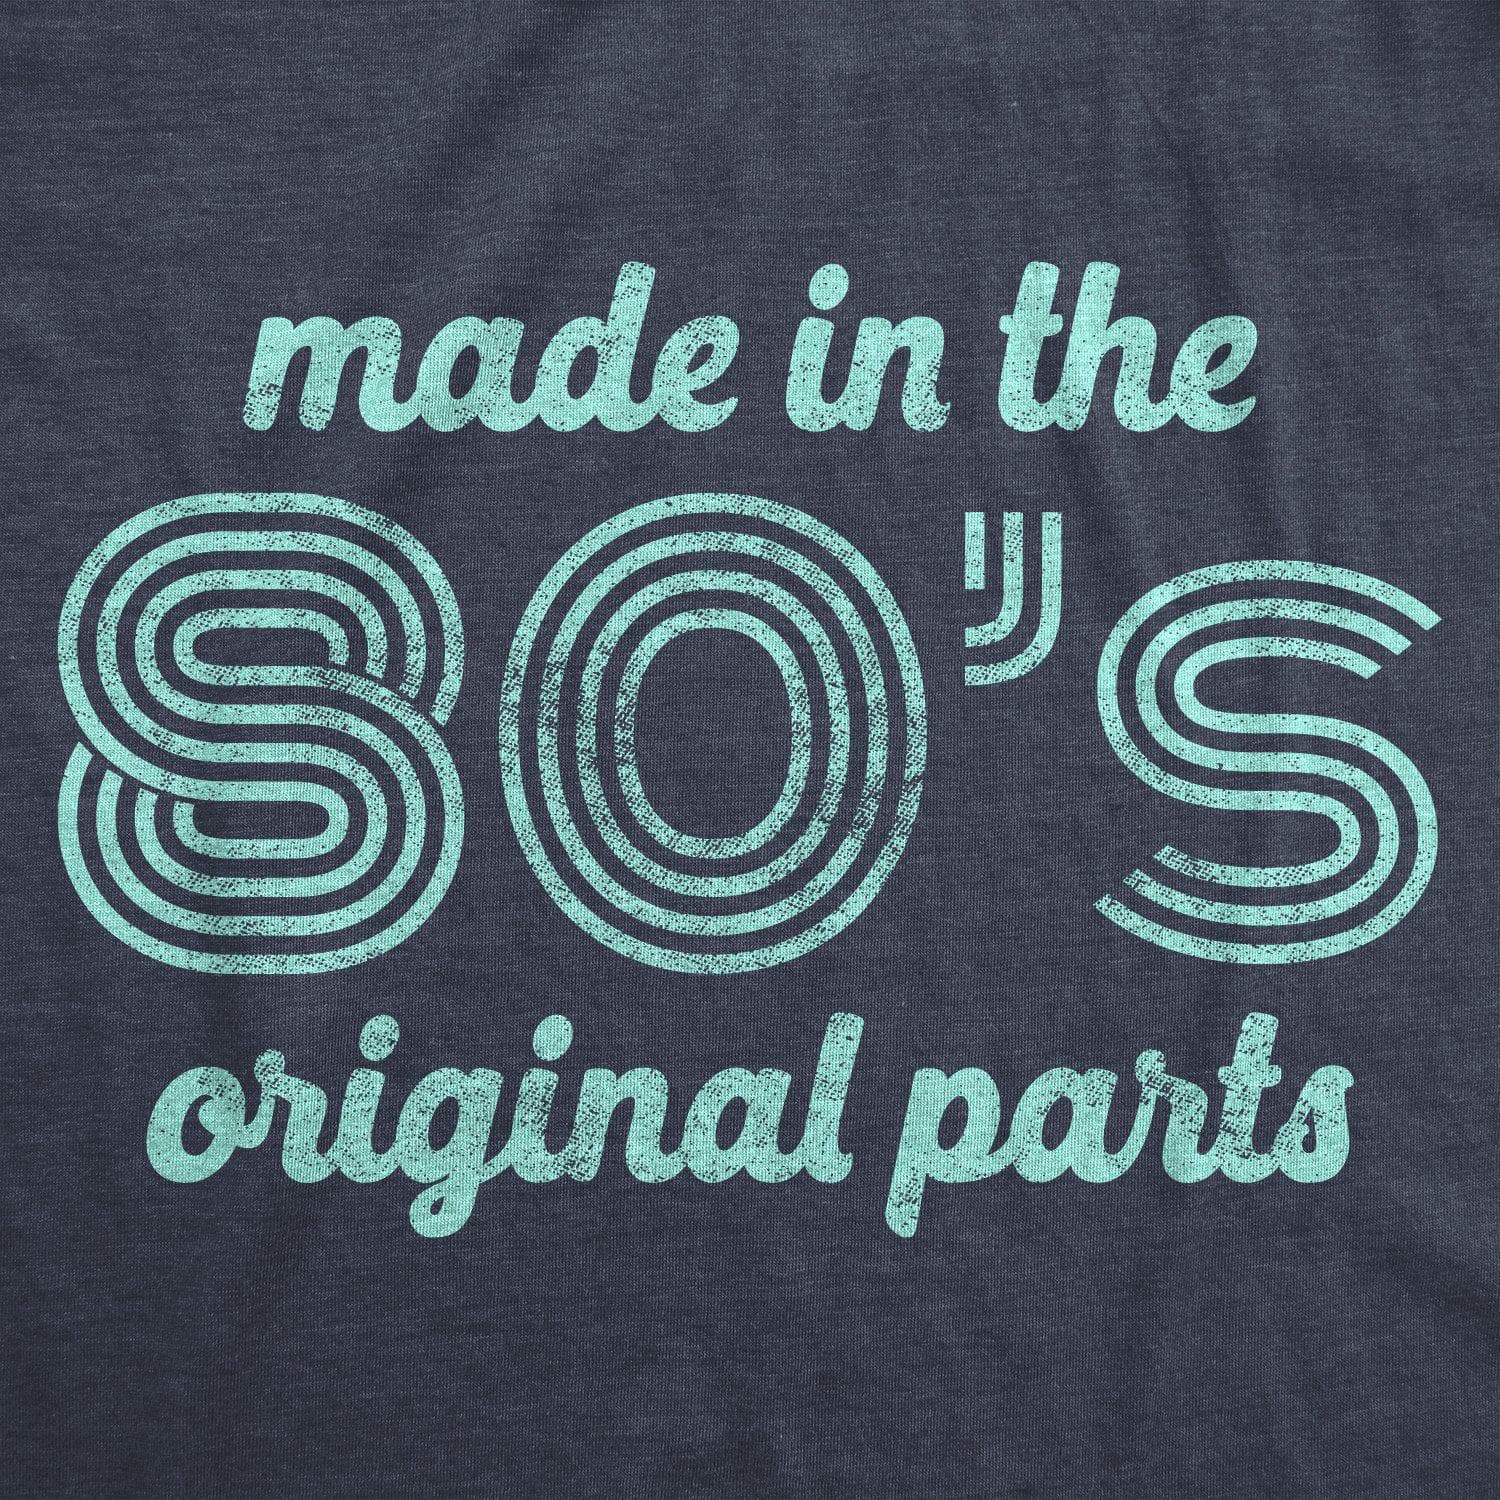 Made In The 80s Original Parts Women's Tshirt - Crazy Dog T-Shirts